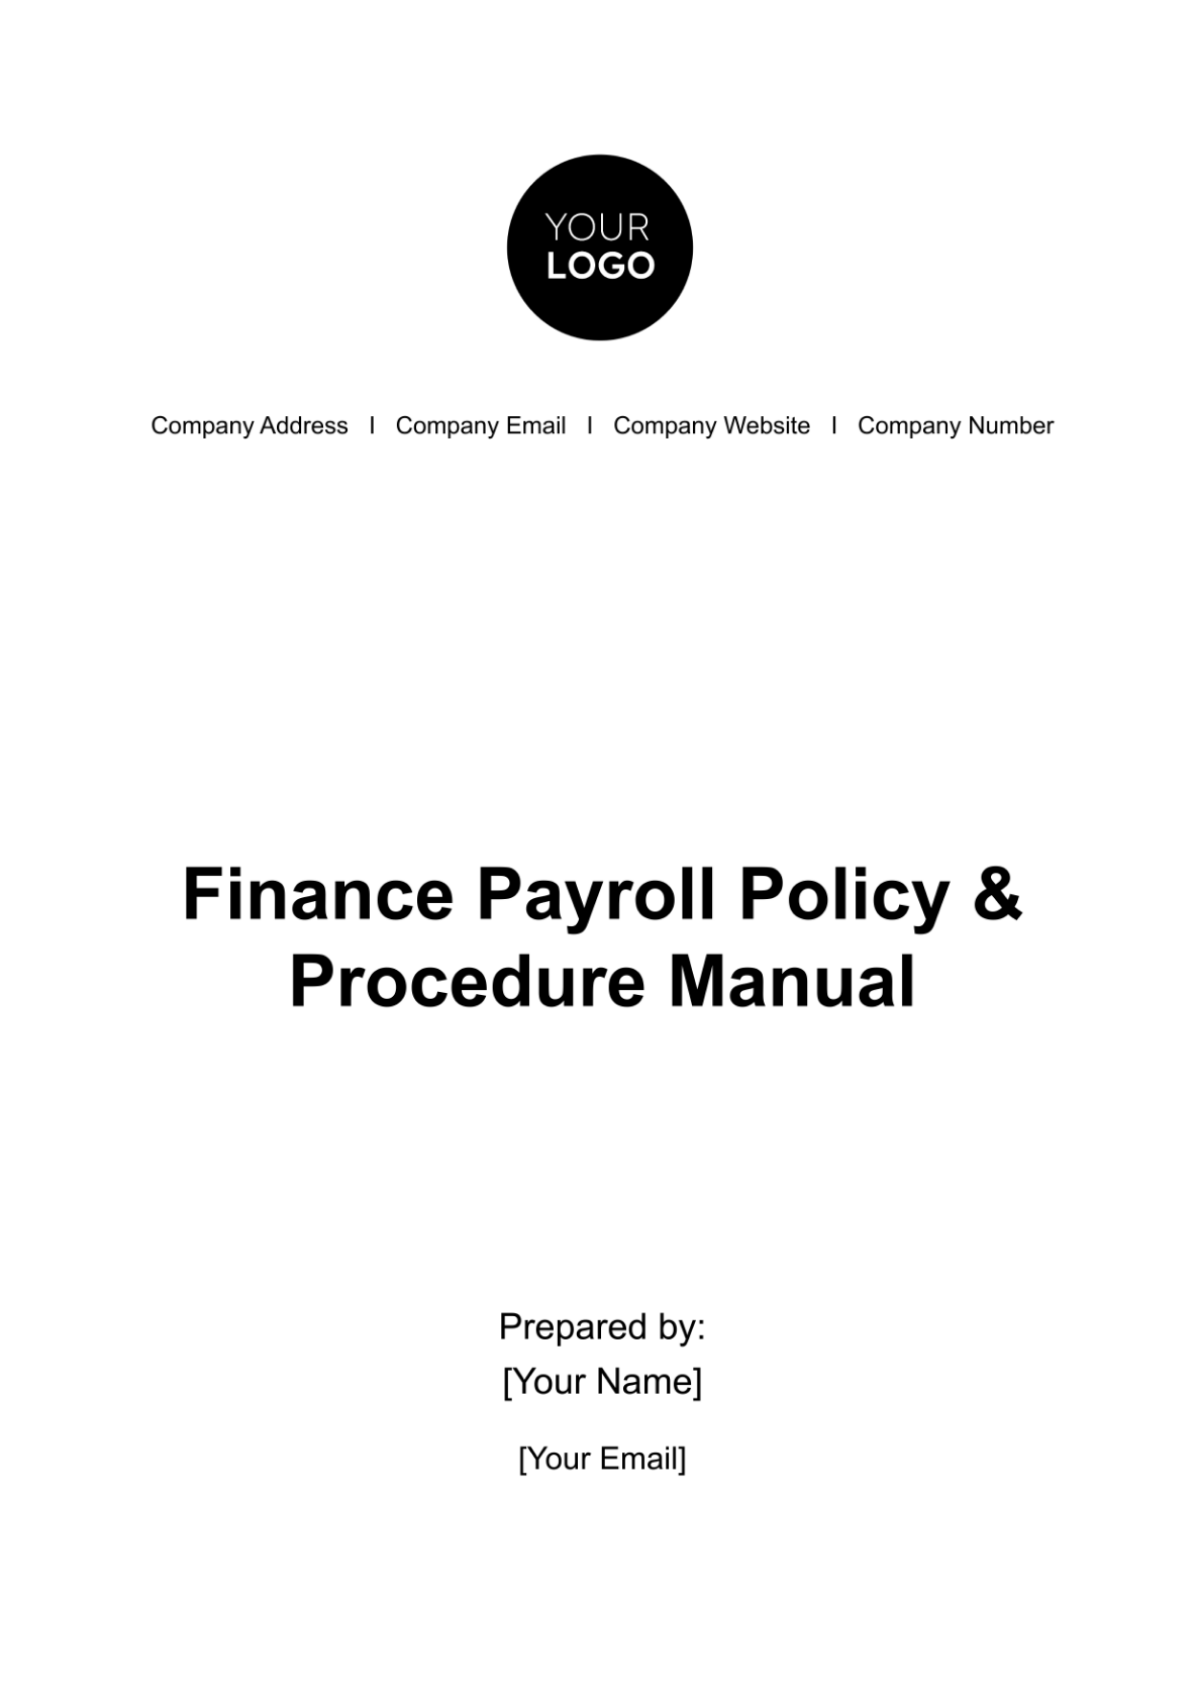 Finance Payroll Policy & Procedure Manual Template